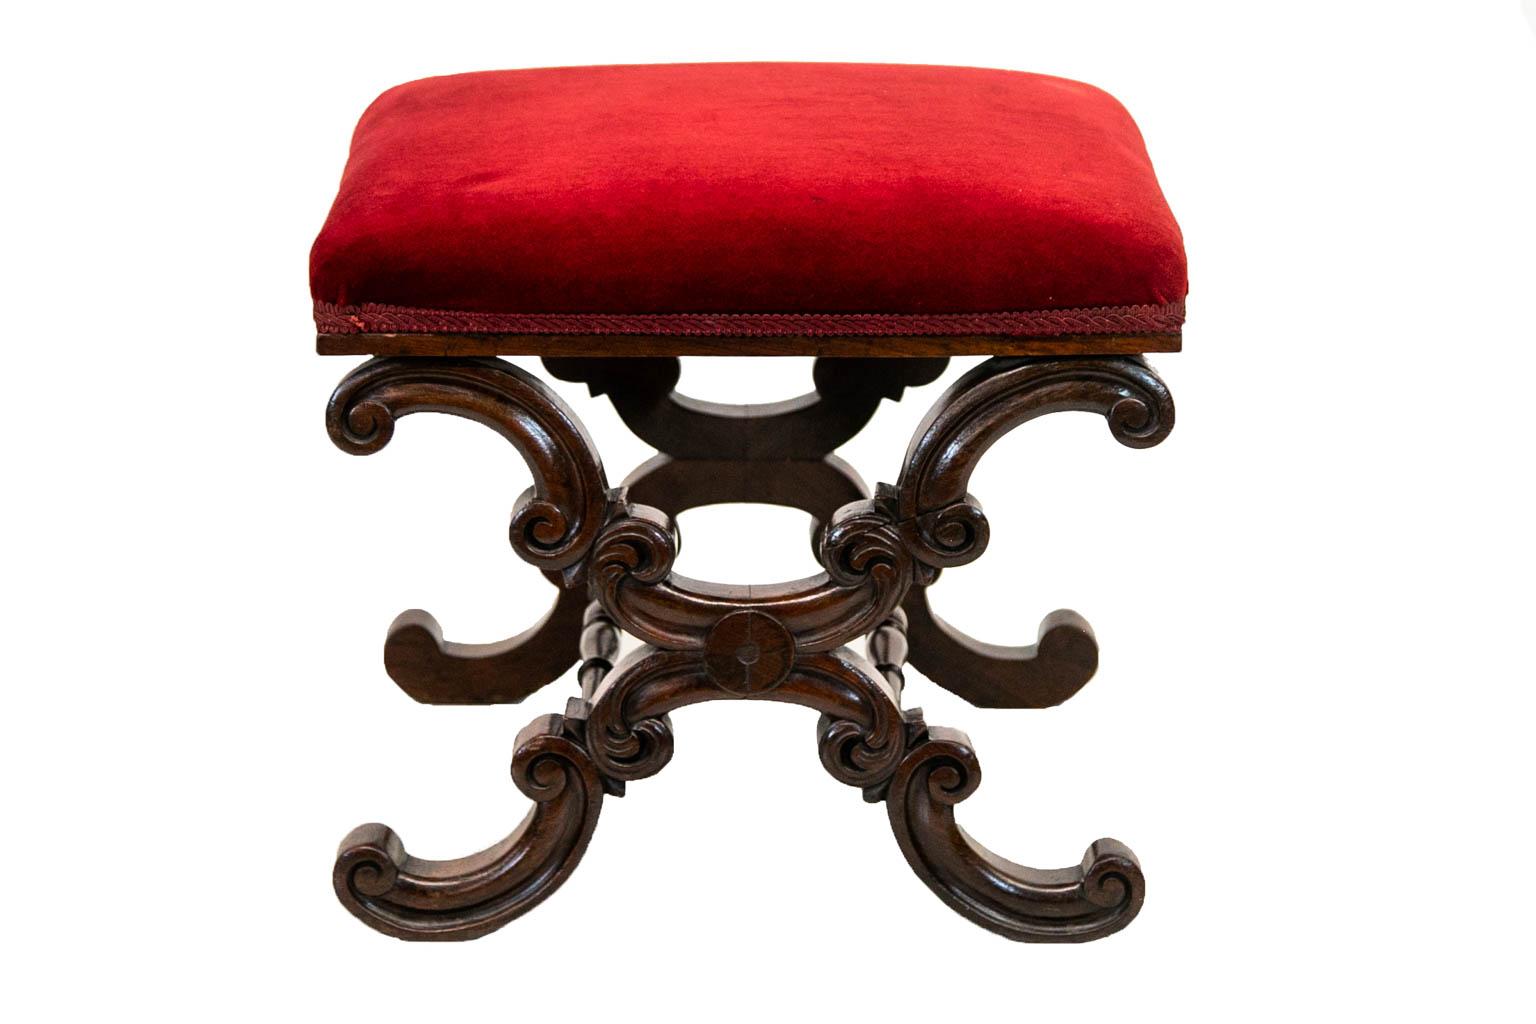 The side supports of this stool are carved with double reversed volutes which are joined by double cross stretchers. The upholstery is in good condition.